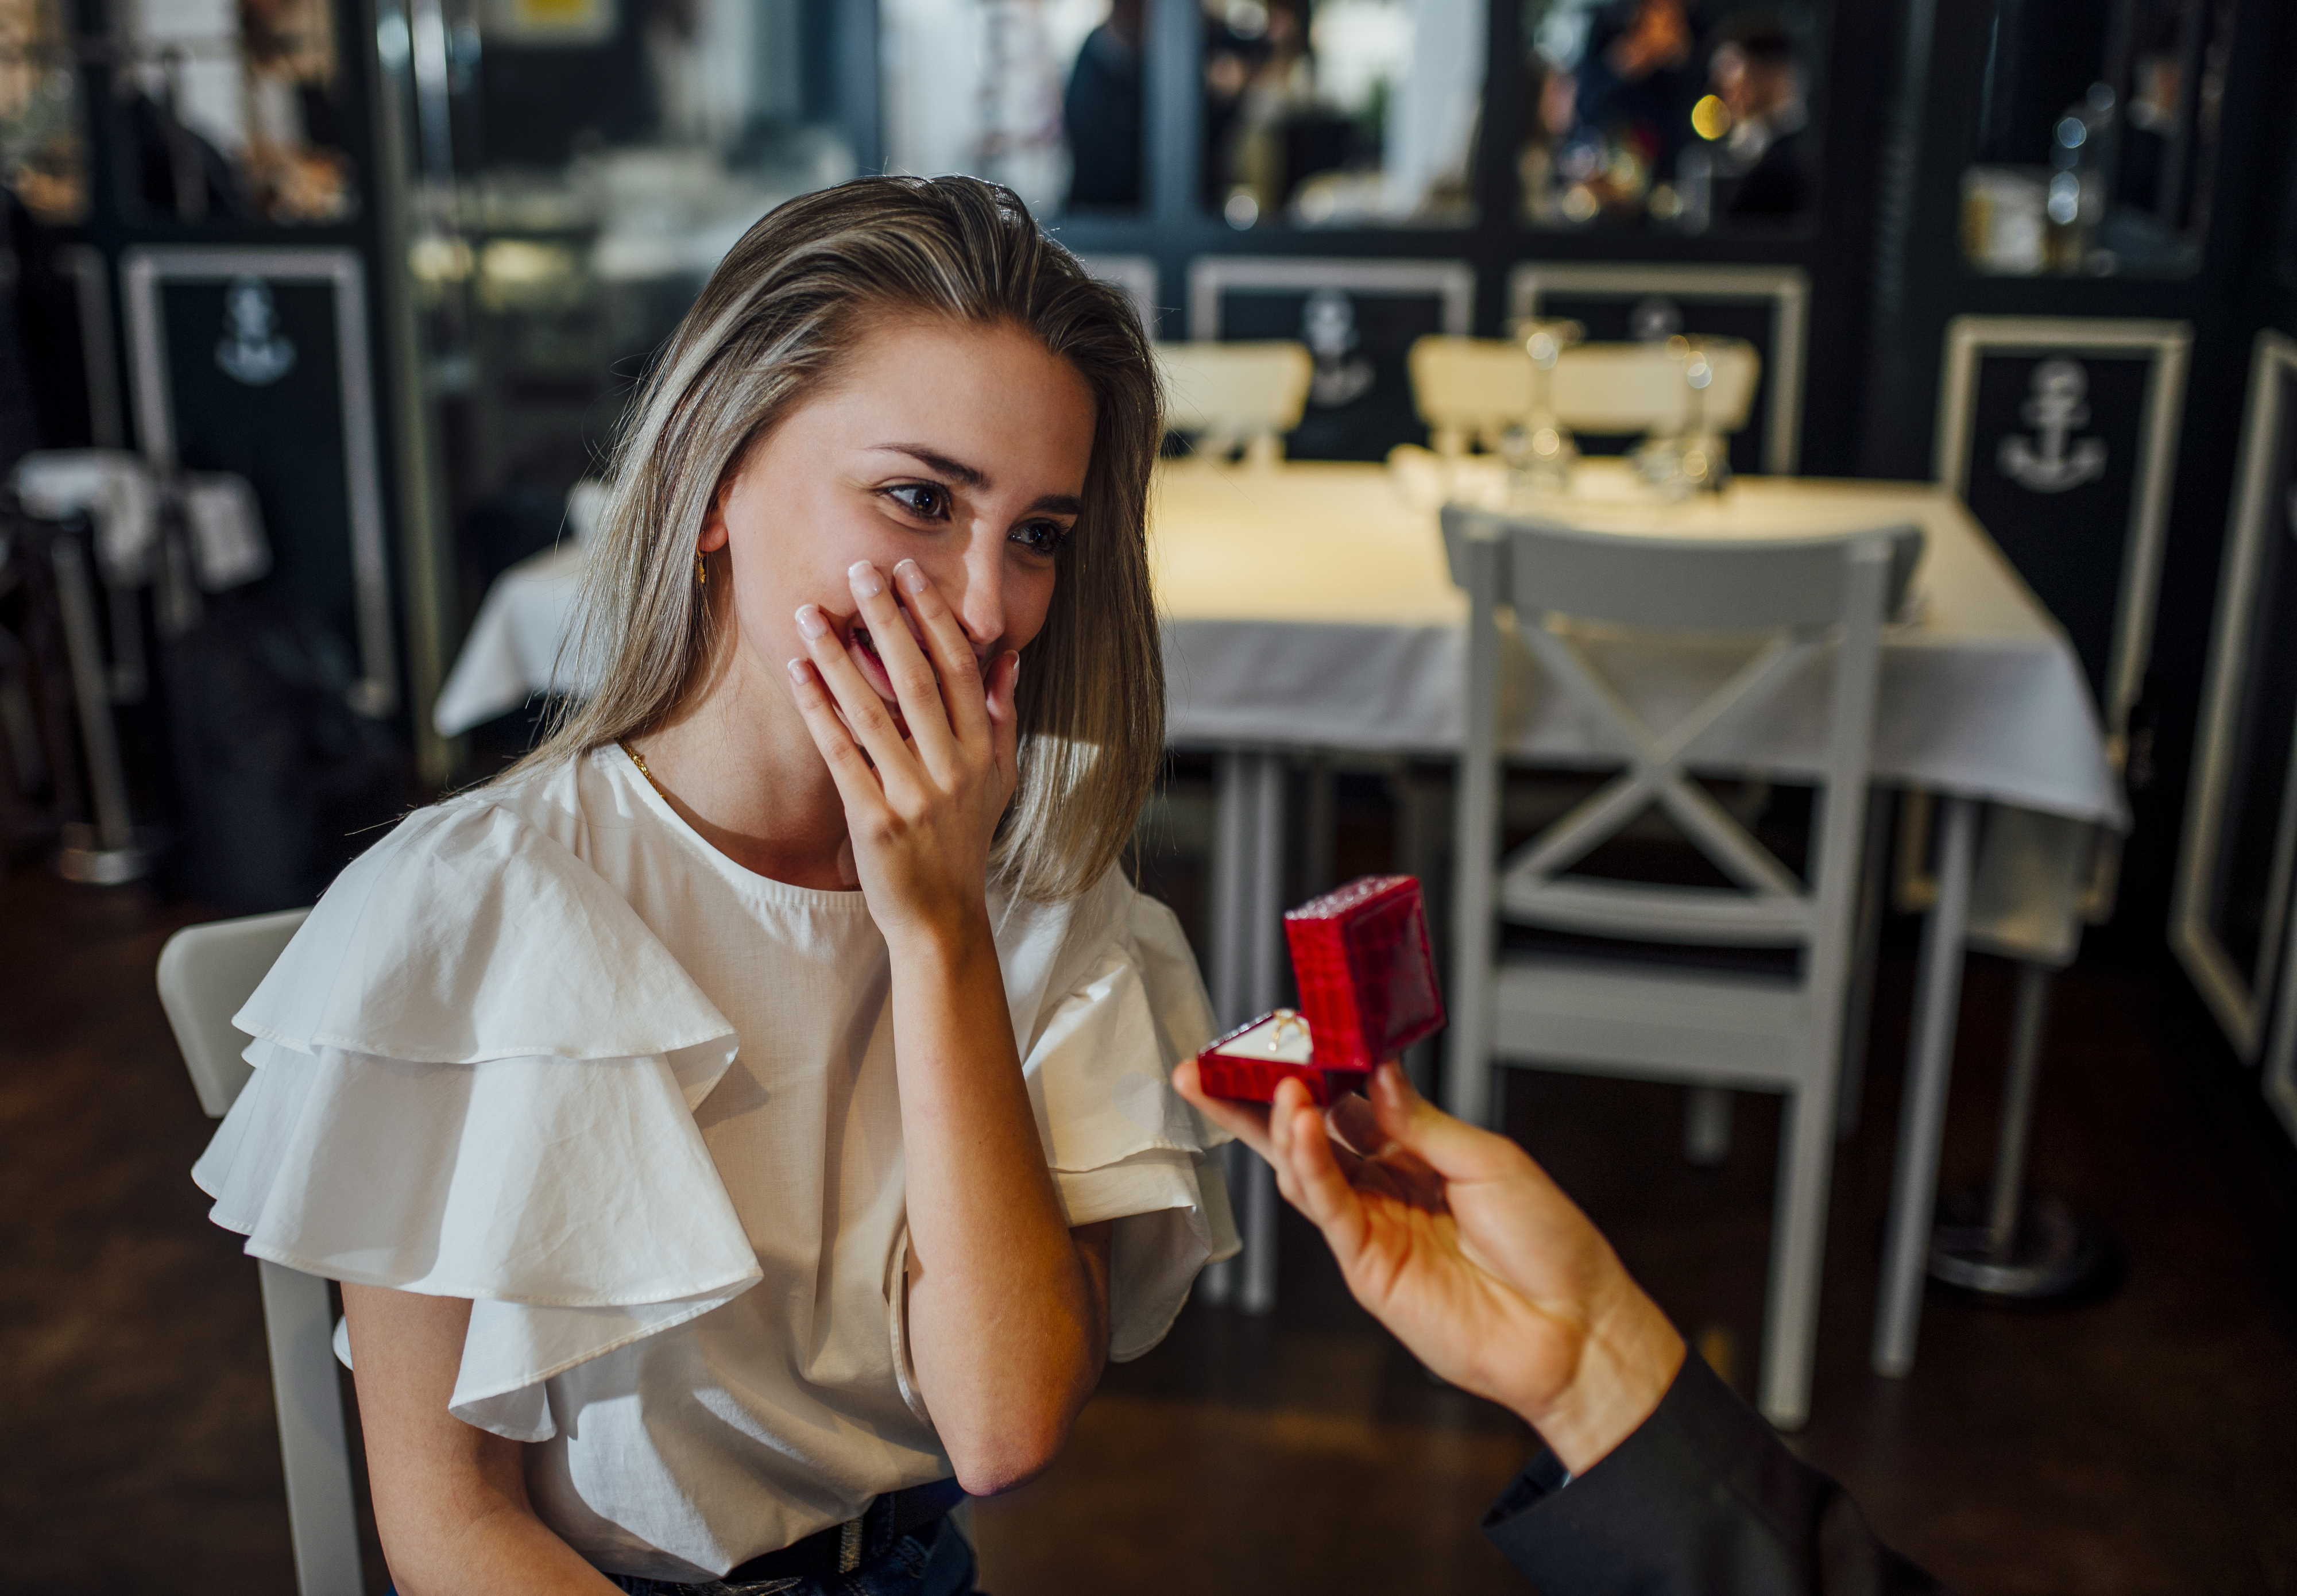 A woman being proposed to